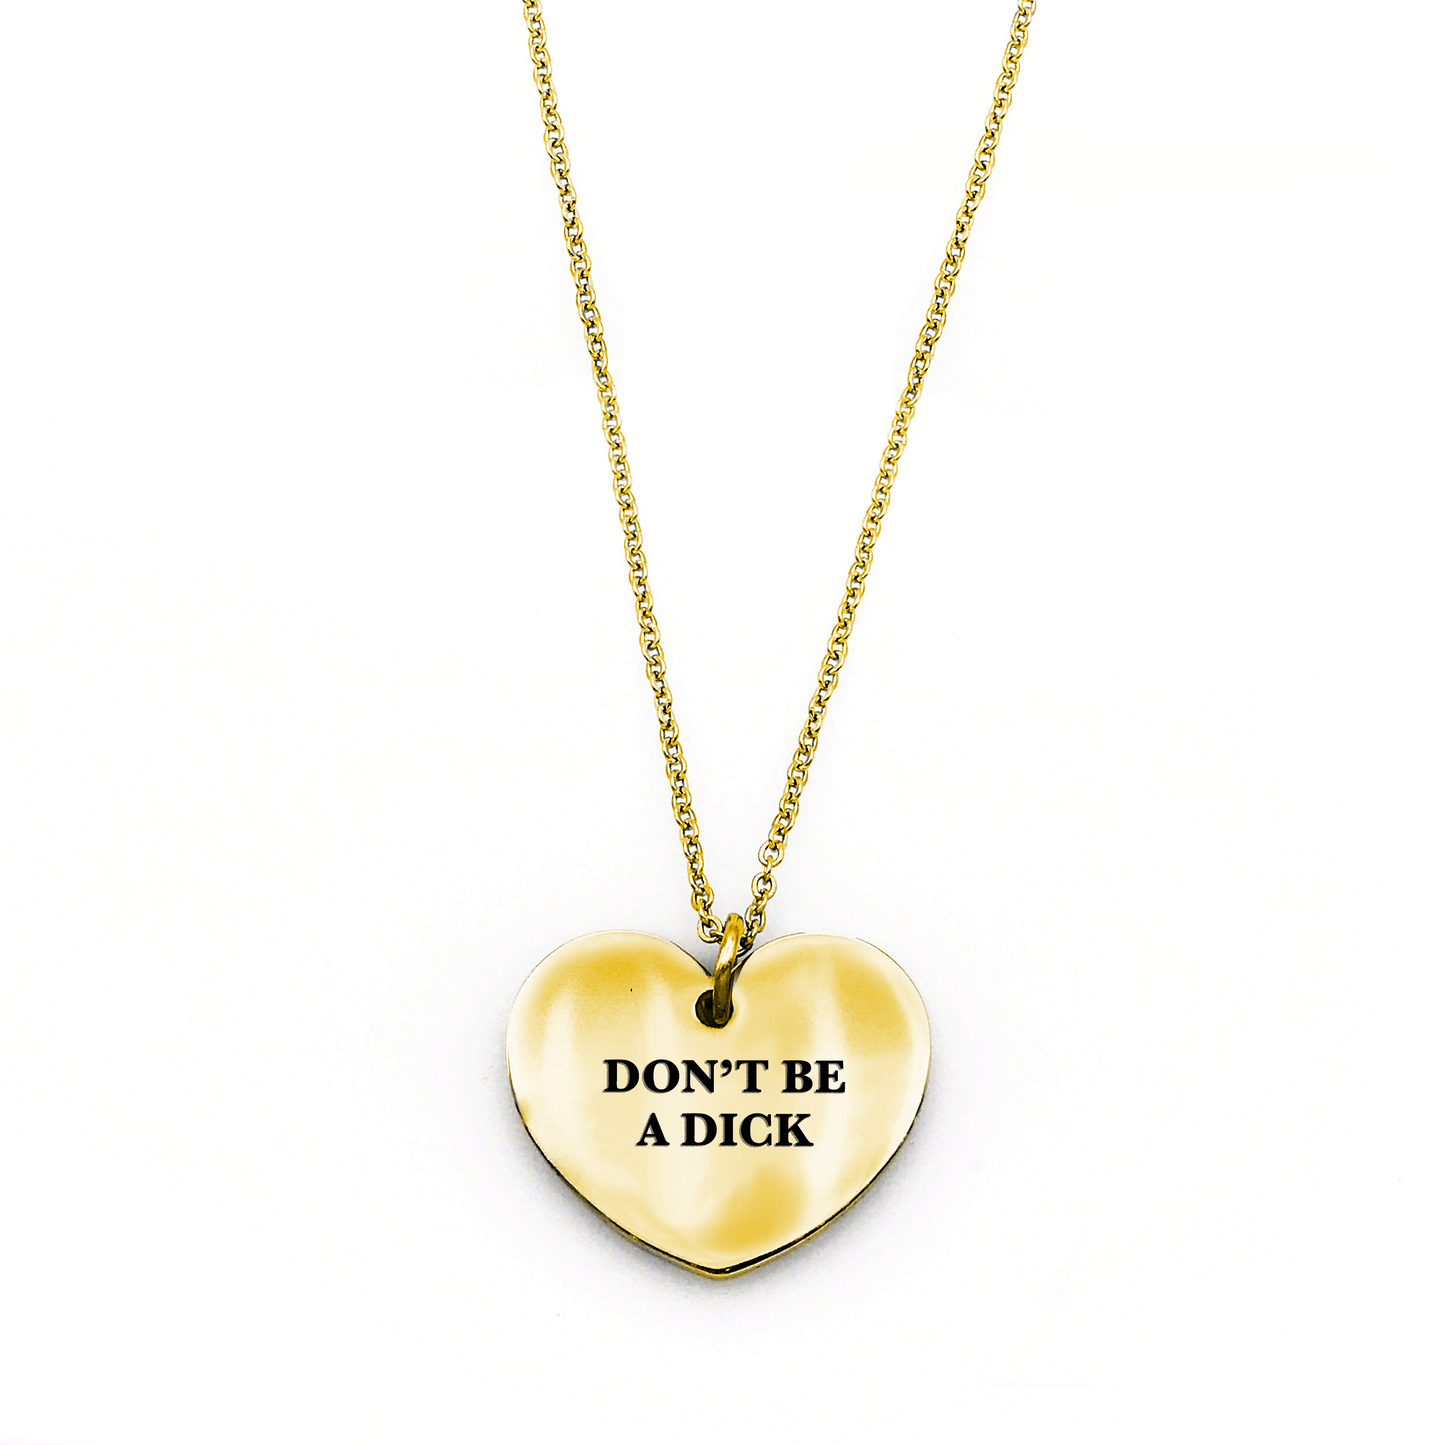 Don’t Be a Dick Necklace: Silver